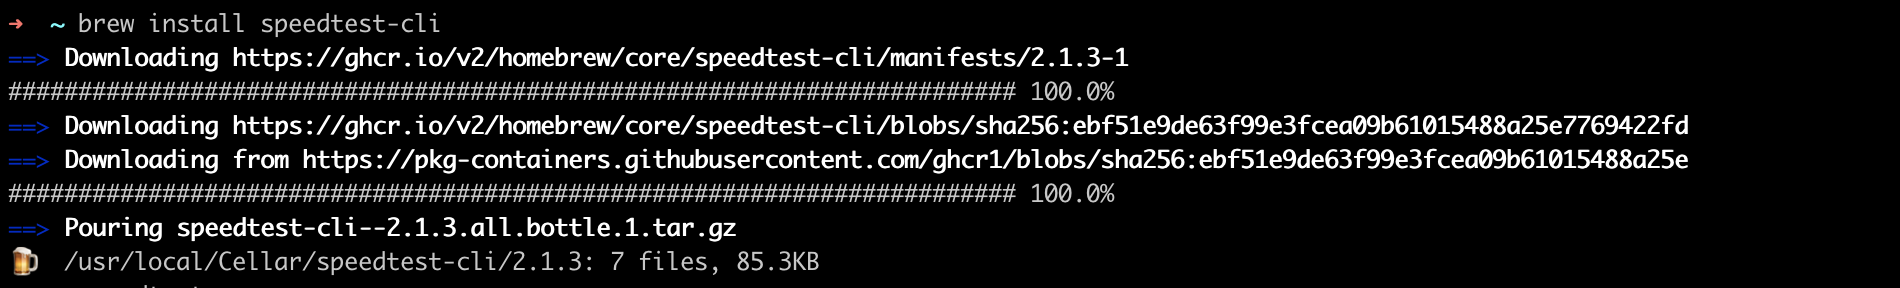 How to test internet speed in terminal on Mac